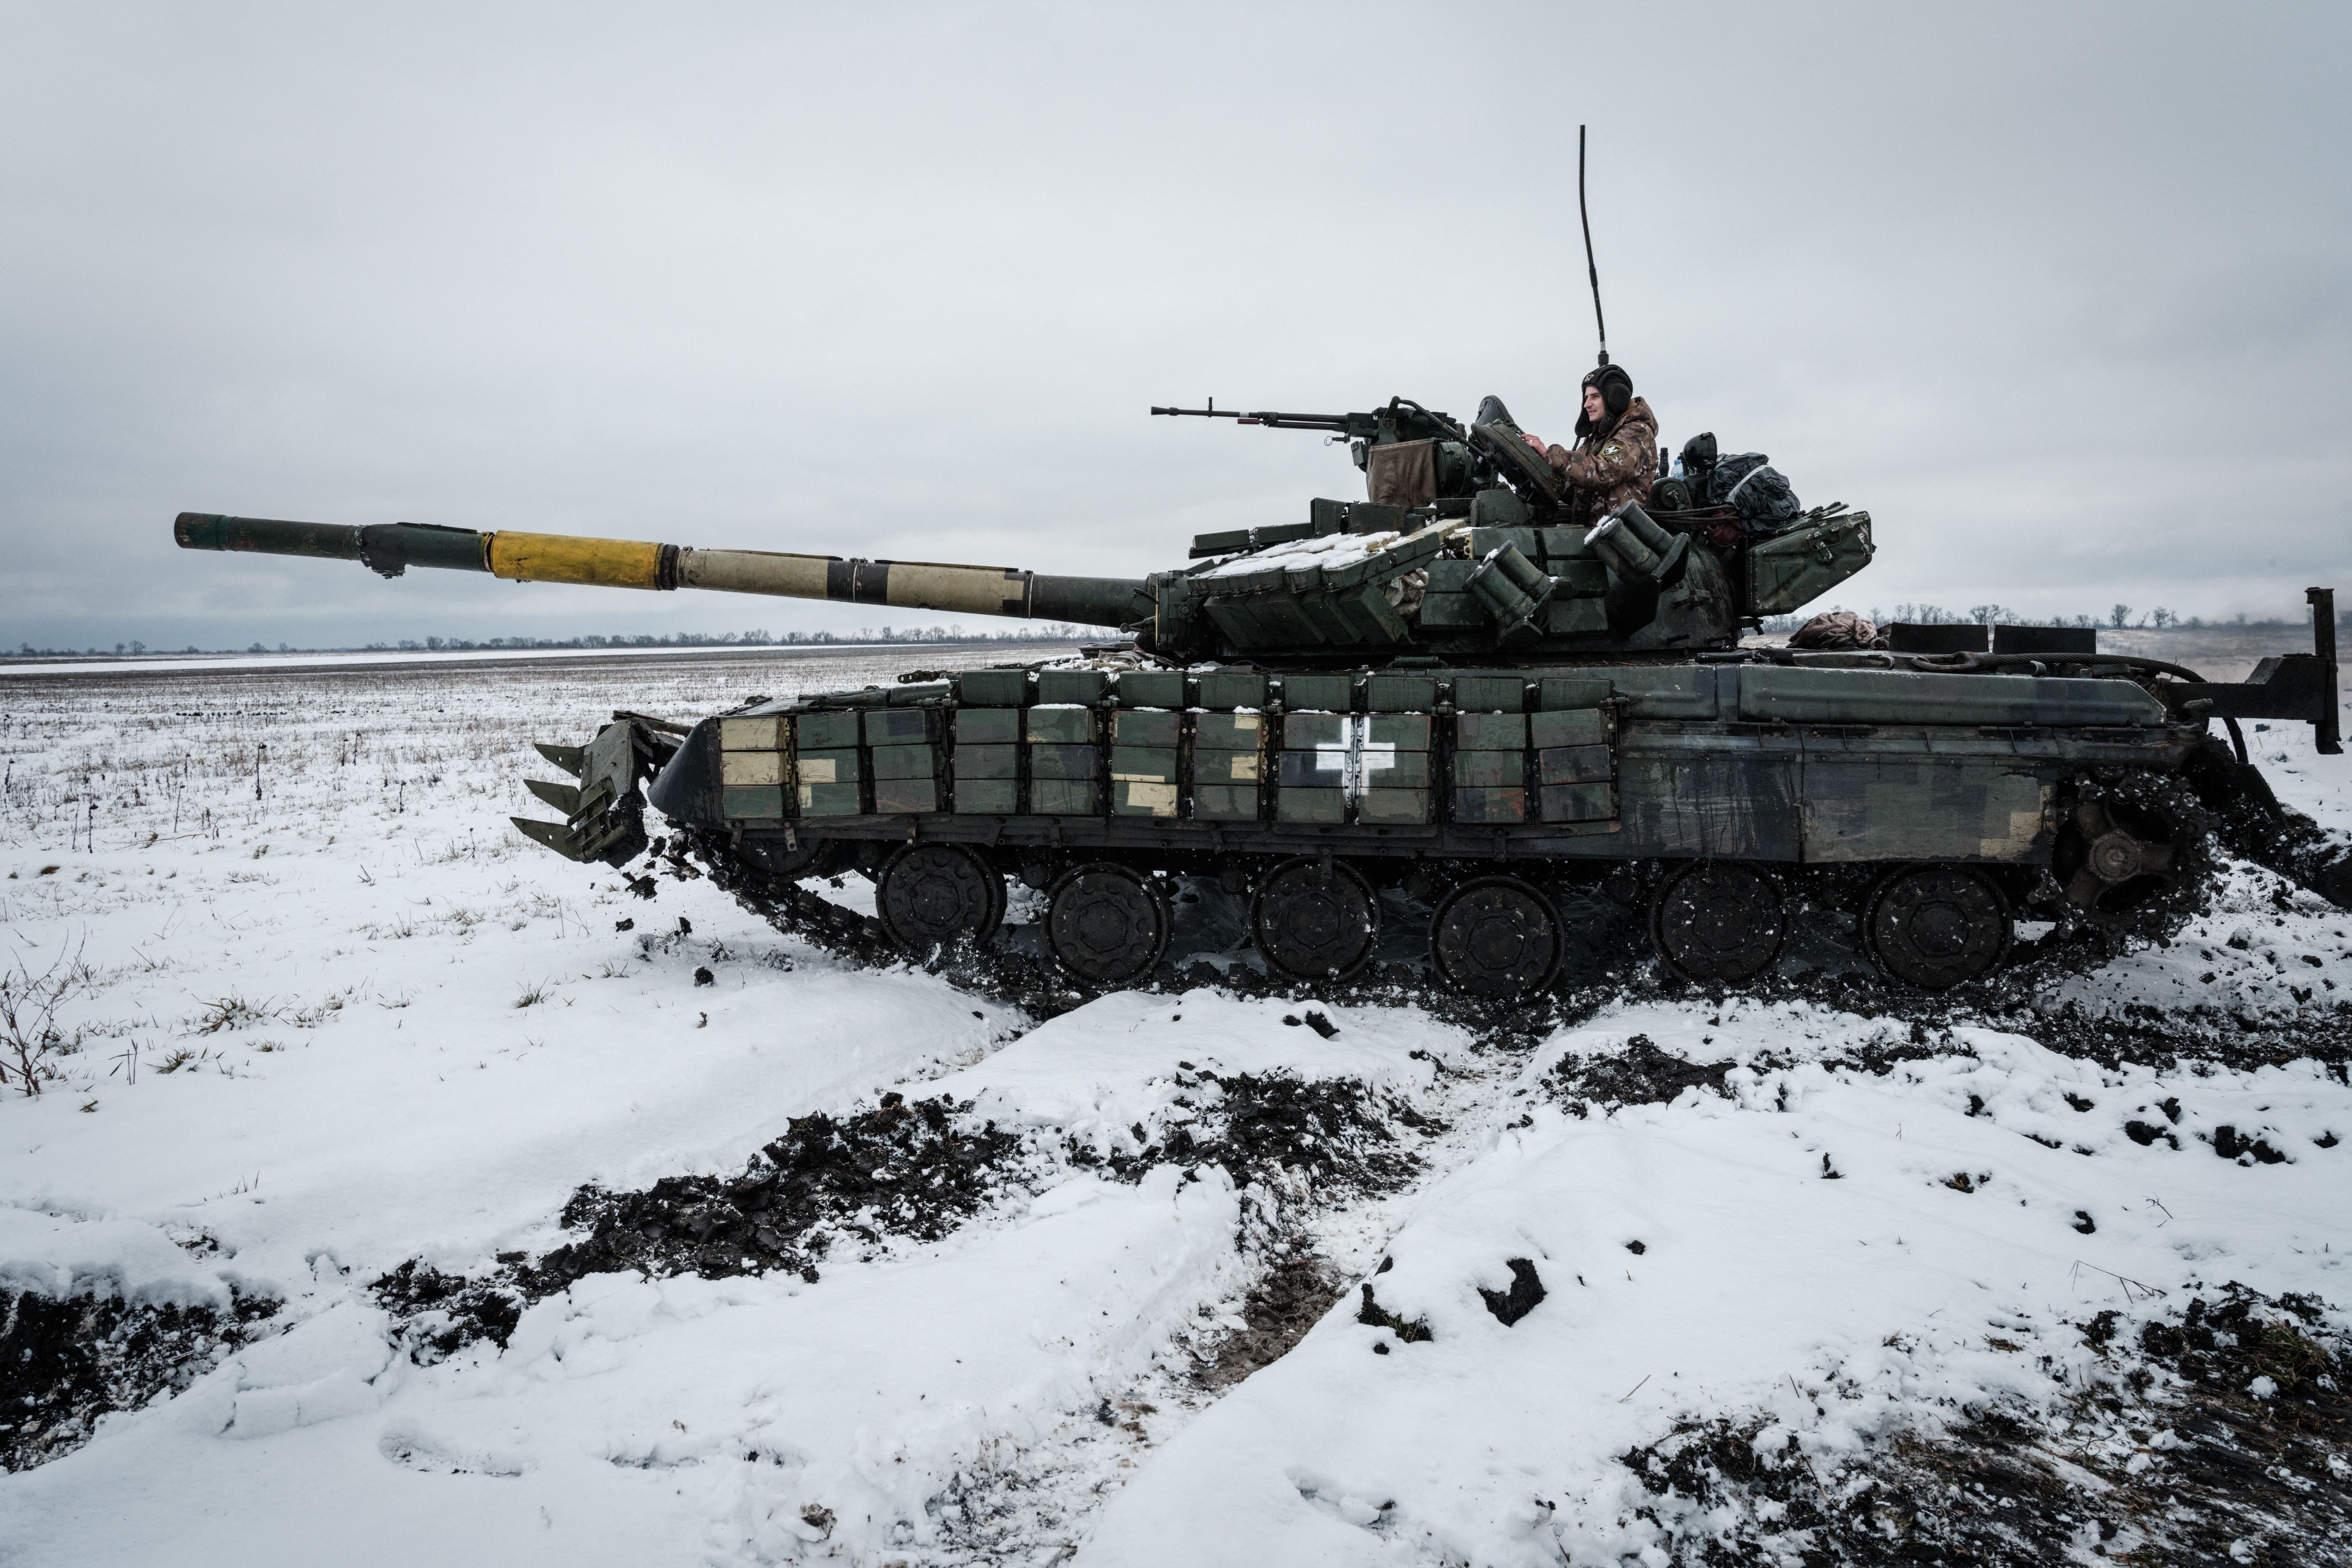 A Ukrainian tank pictured near the front line in Donetsk